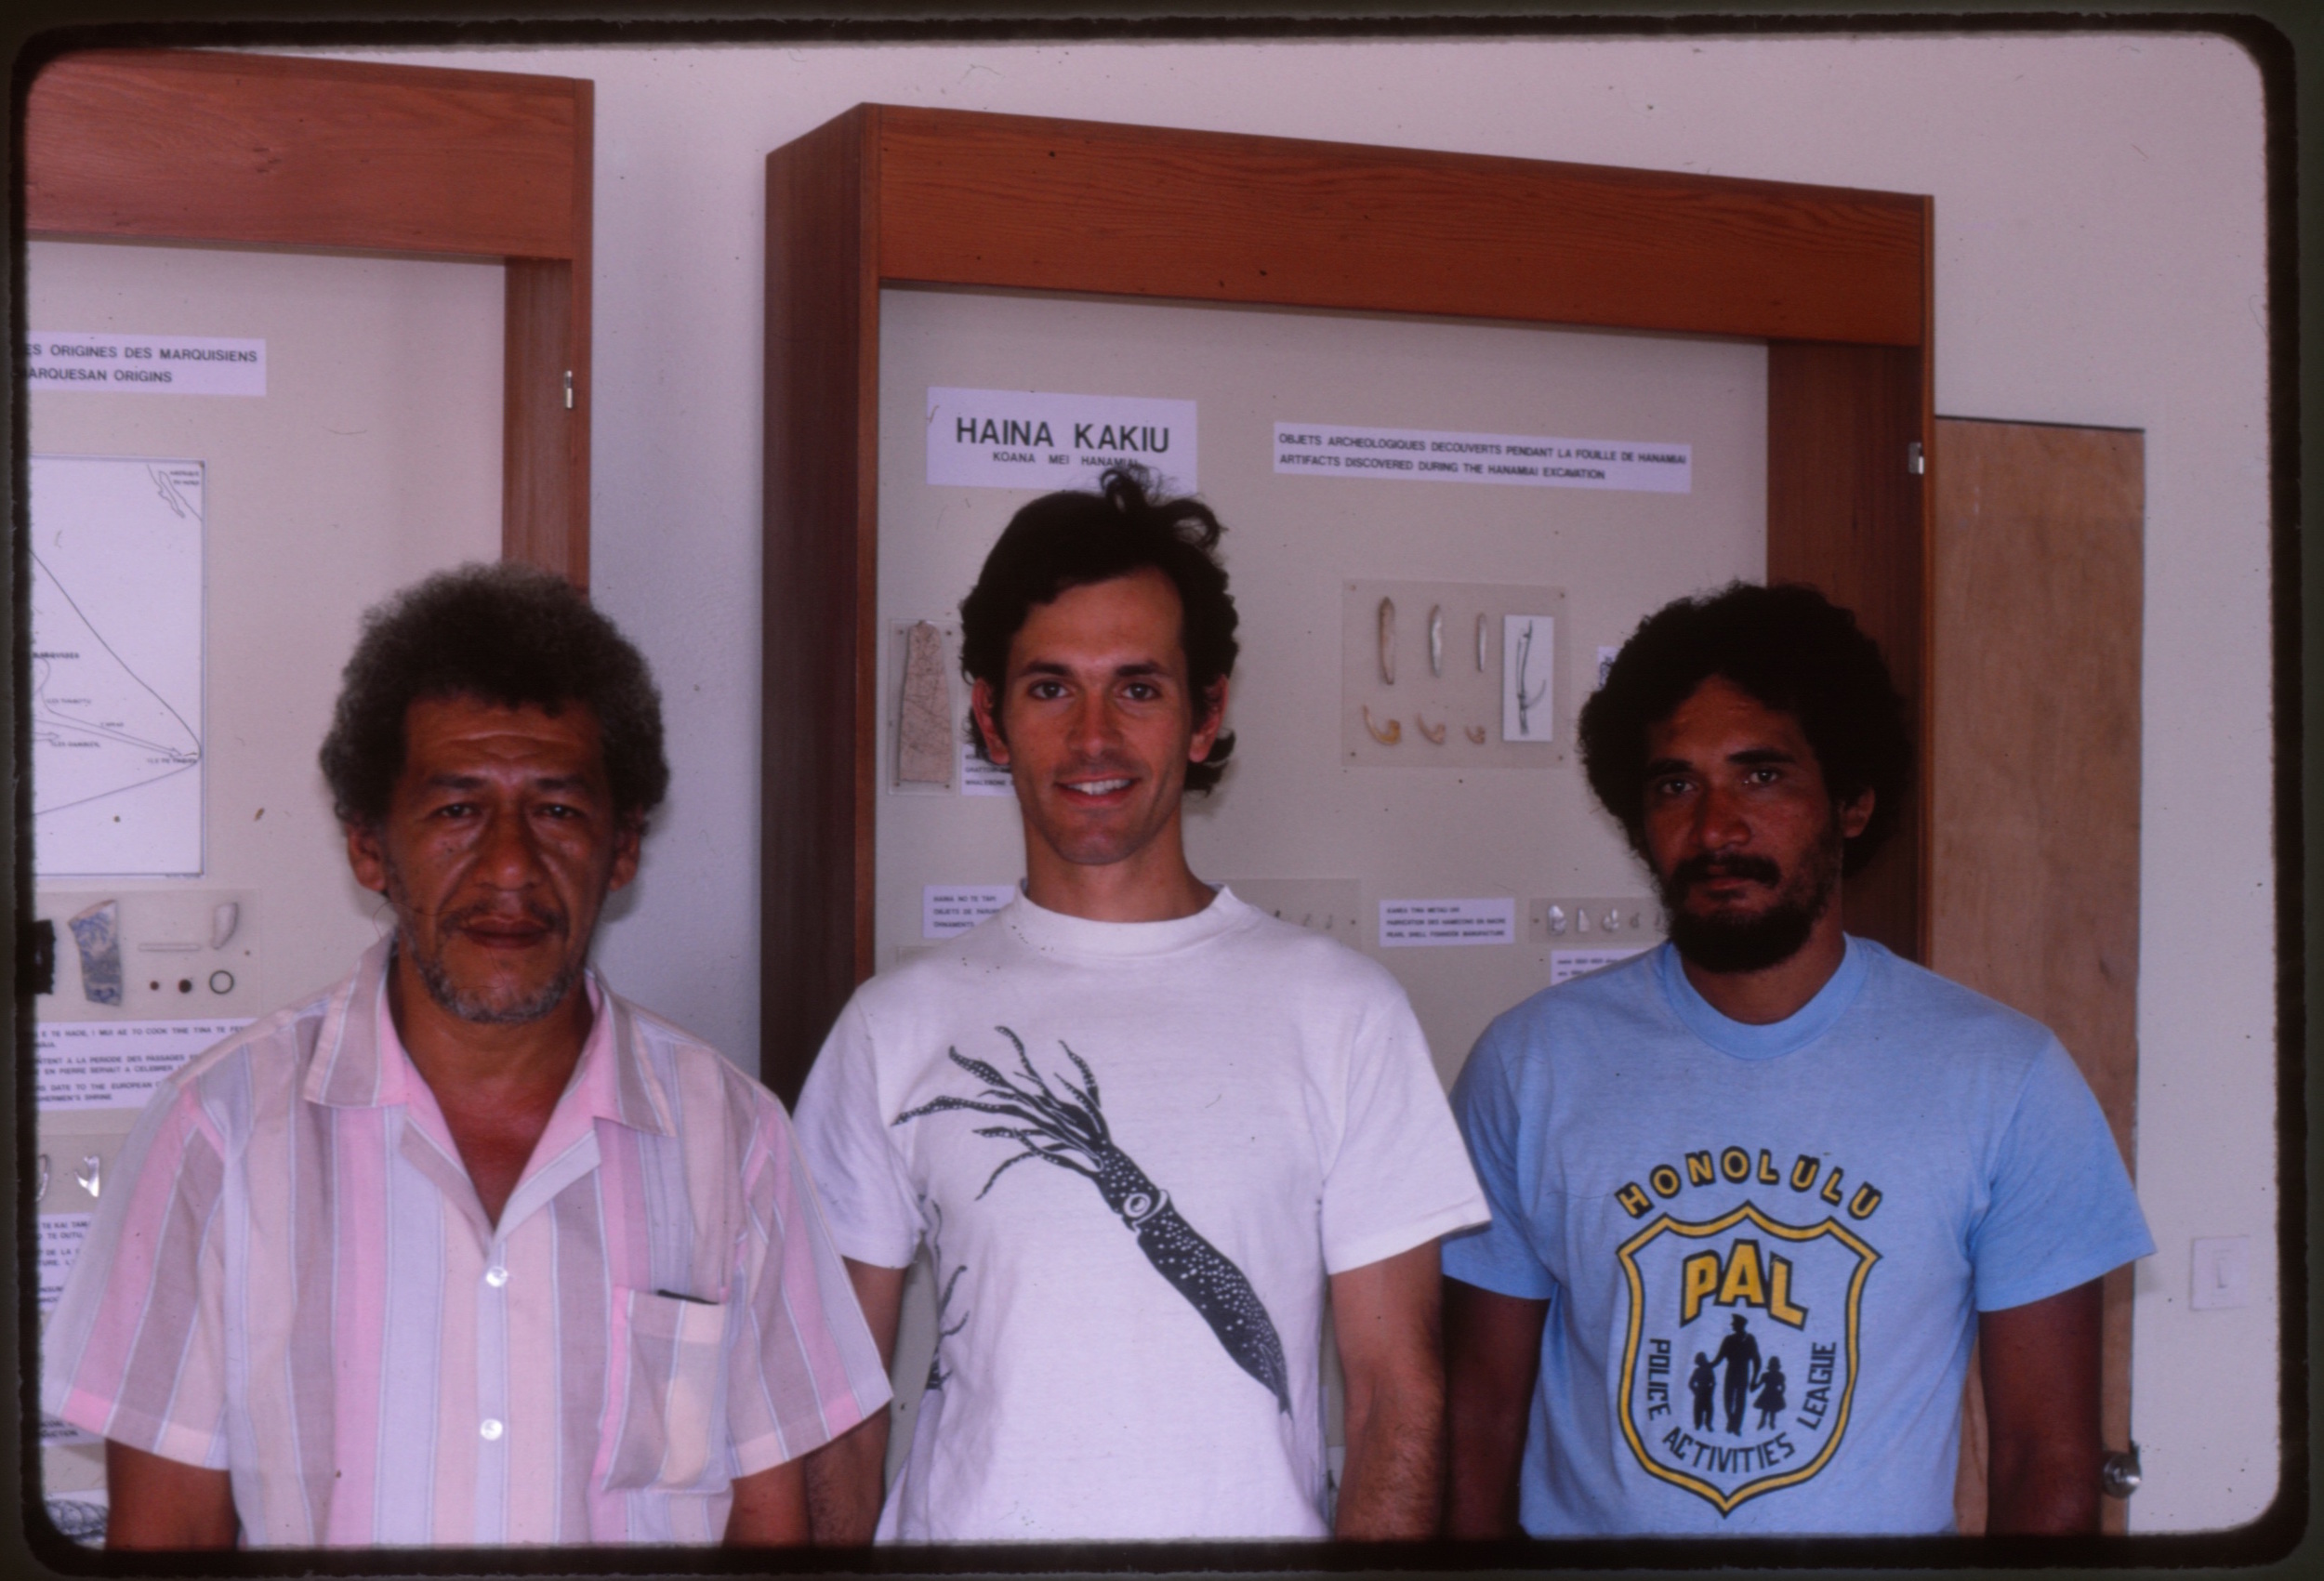 1987. T. Tetahiotupa, B. Rolett and T. Teiefitu upon completion of the original three display cases. These exhibited artifacts from the first archaeological excavations on Tahuata. (Copy)